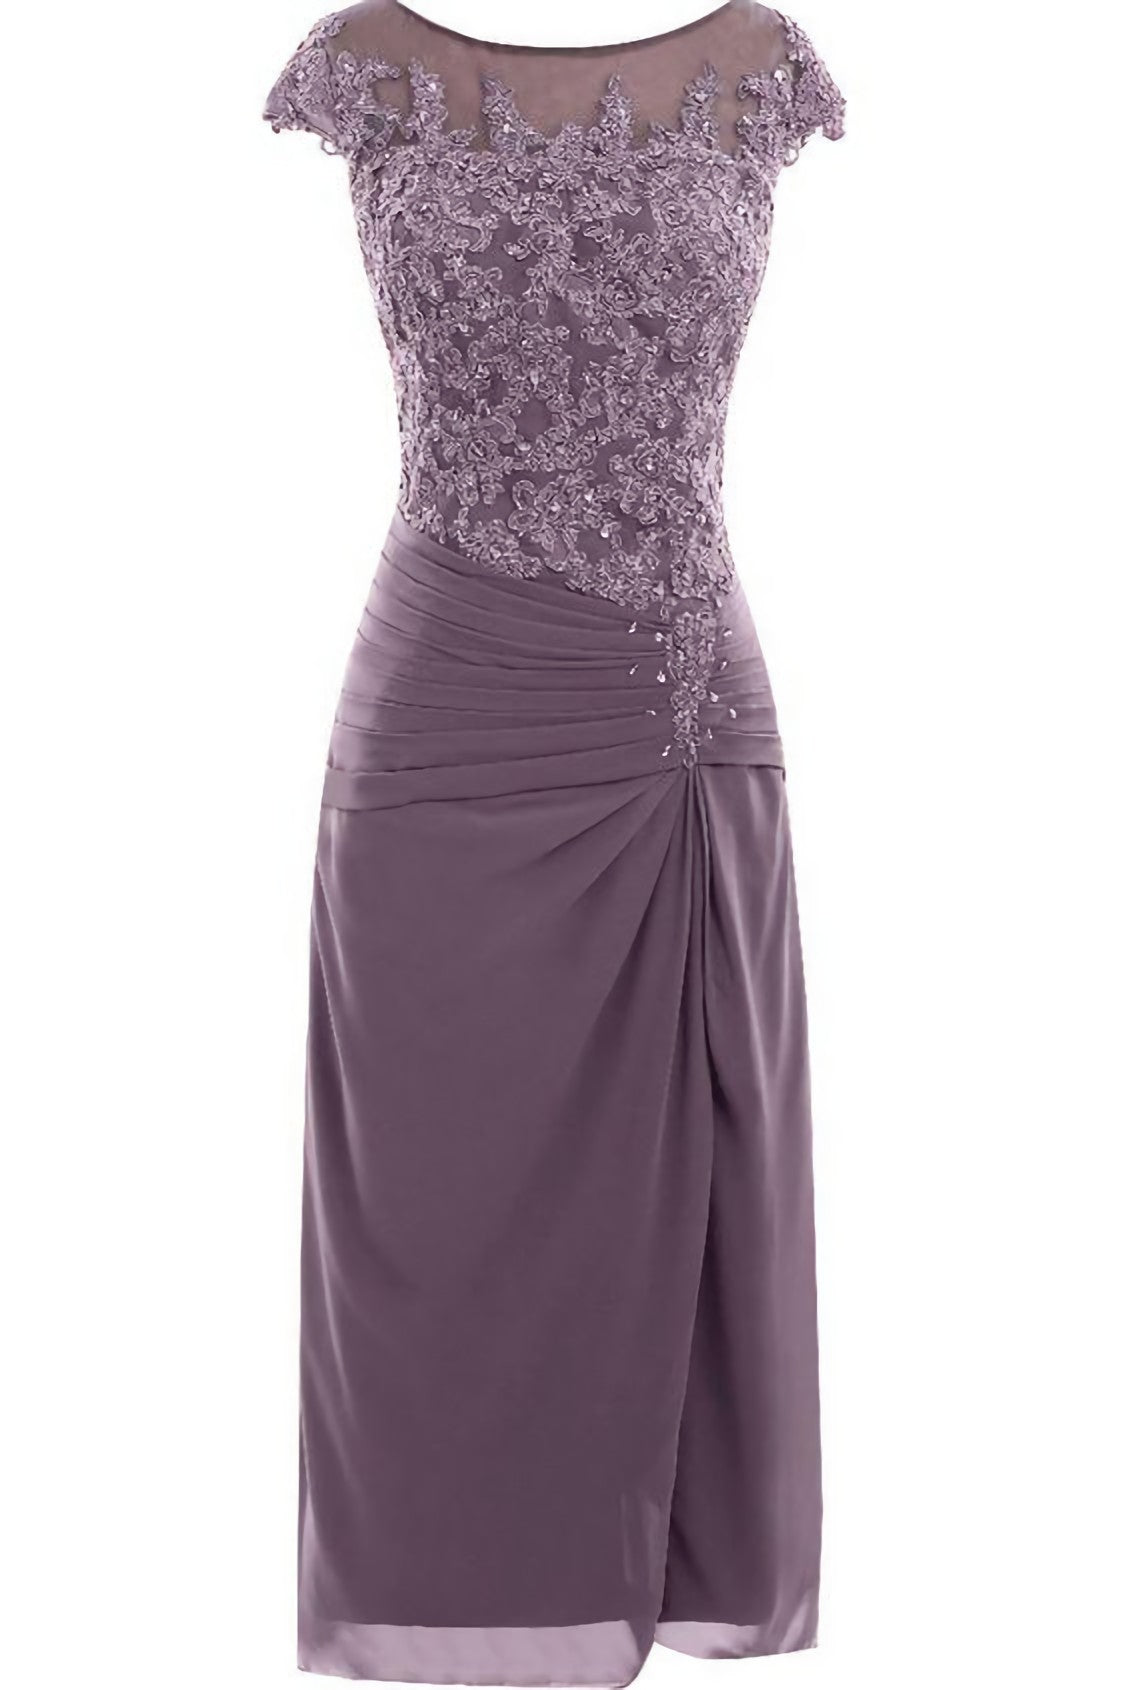 Prom Dresses Suits Ideas, Knee Length Mauve Tight Chiffon Mother Of The Bride Prom Dress, With Cap Sleeves